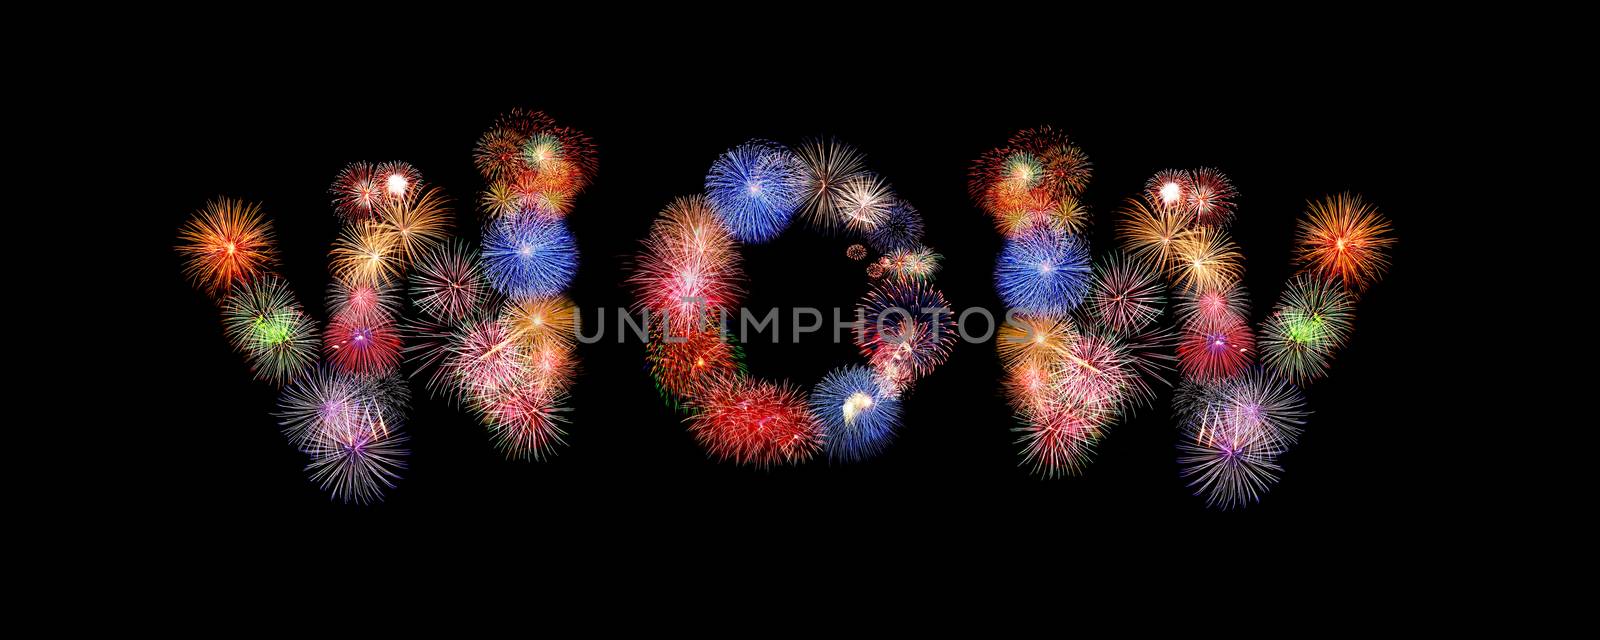 wow word colorful fireworks text isolated on black background